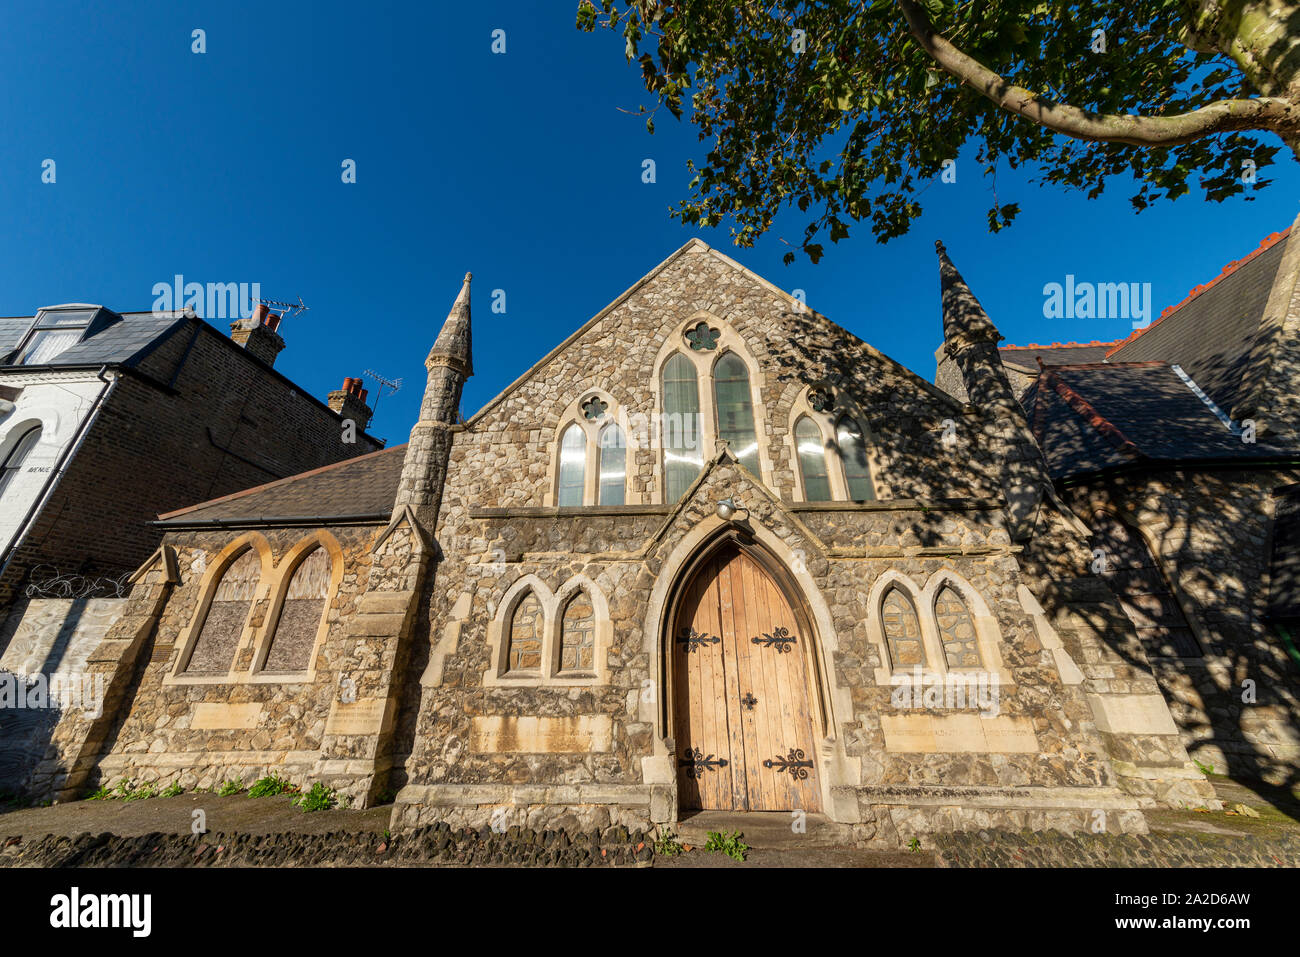 Former Wesleyan Chapel, Park Road Methodist Church, built in 1870. Southend’s first Methodist Church. Being developed for housing. Westcliff Stock Photo